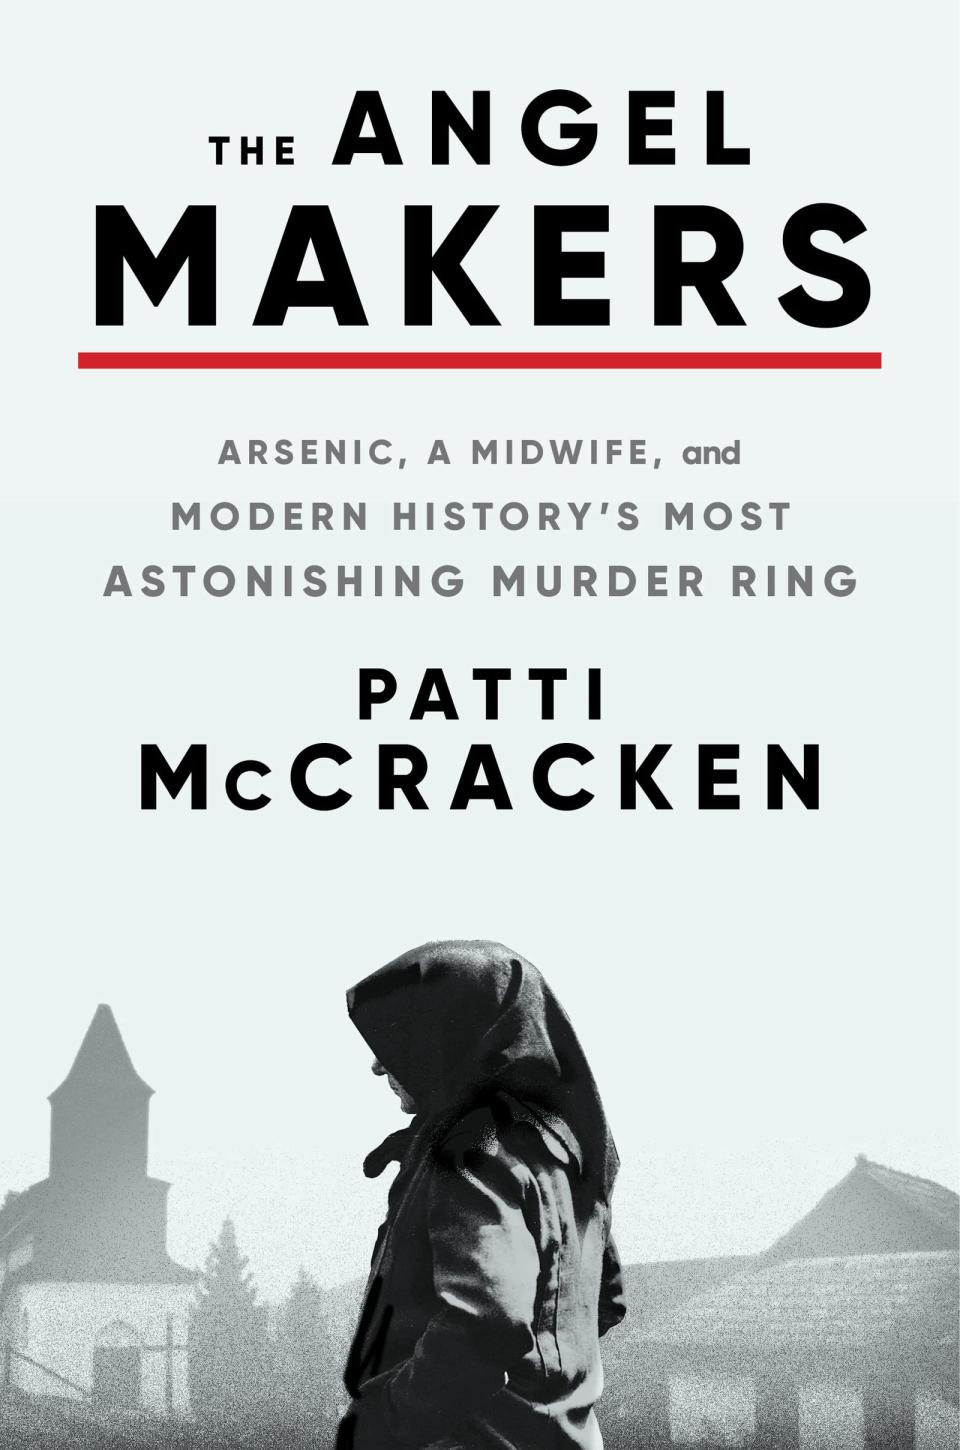 Cover of "The Angel Makers" by Patti McCracken